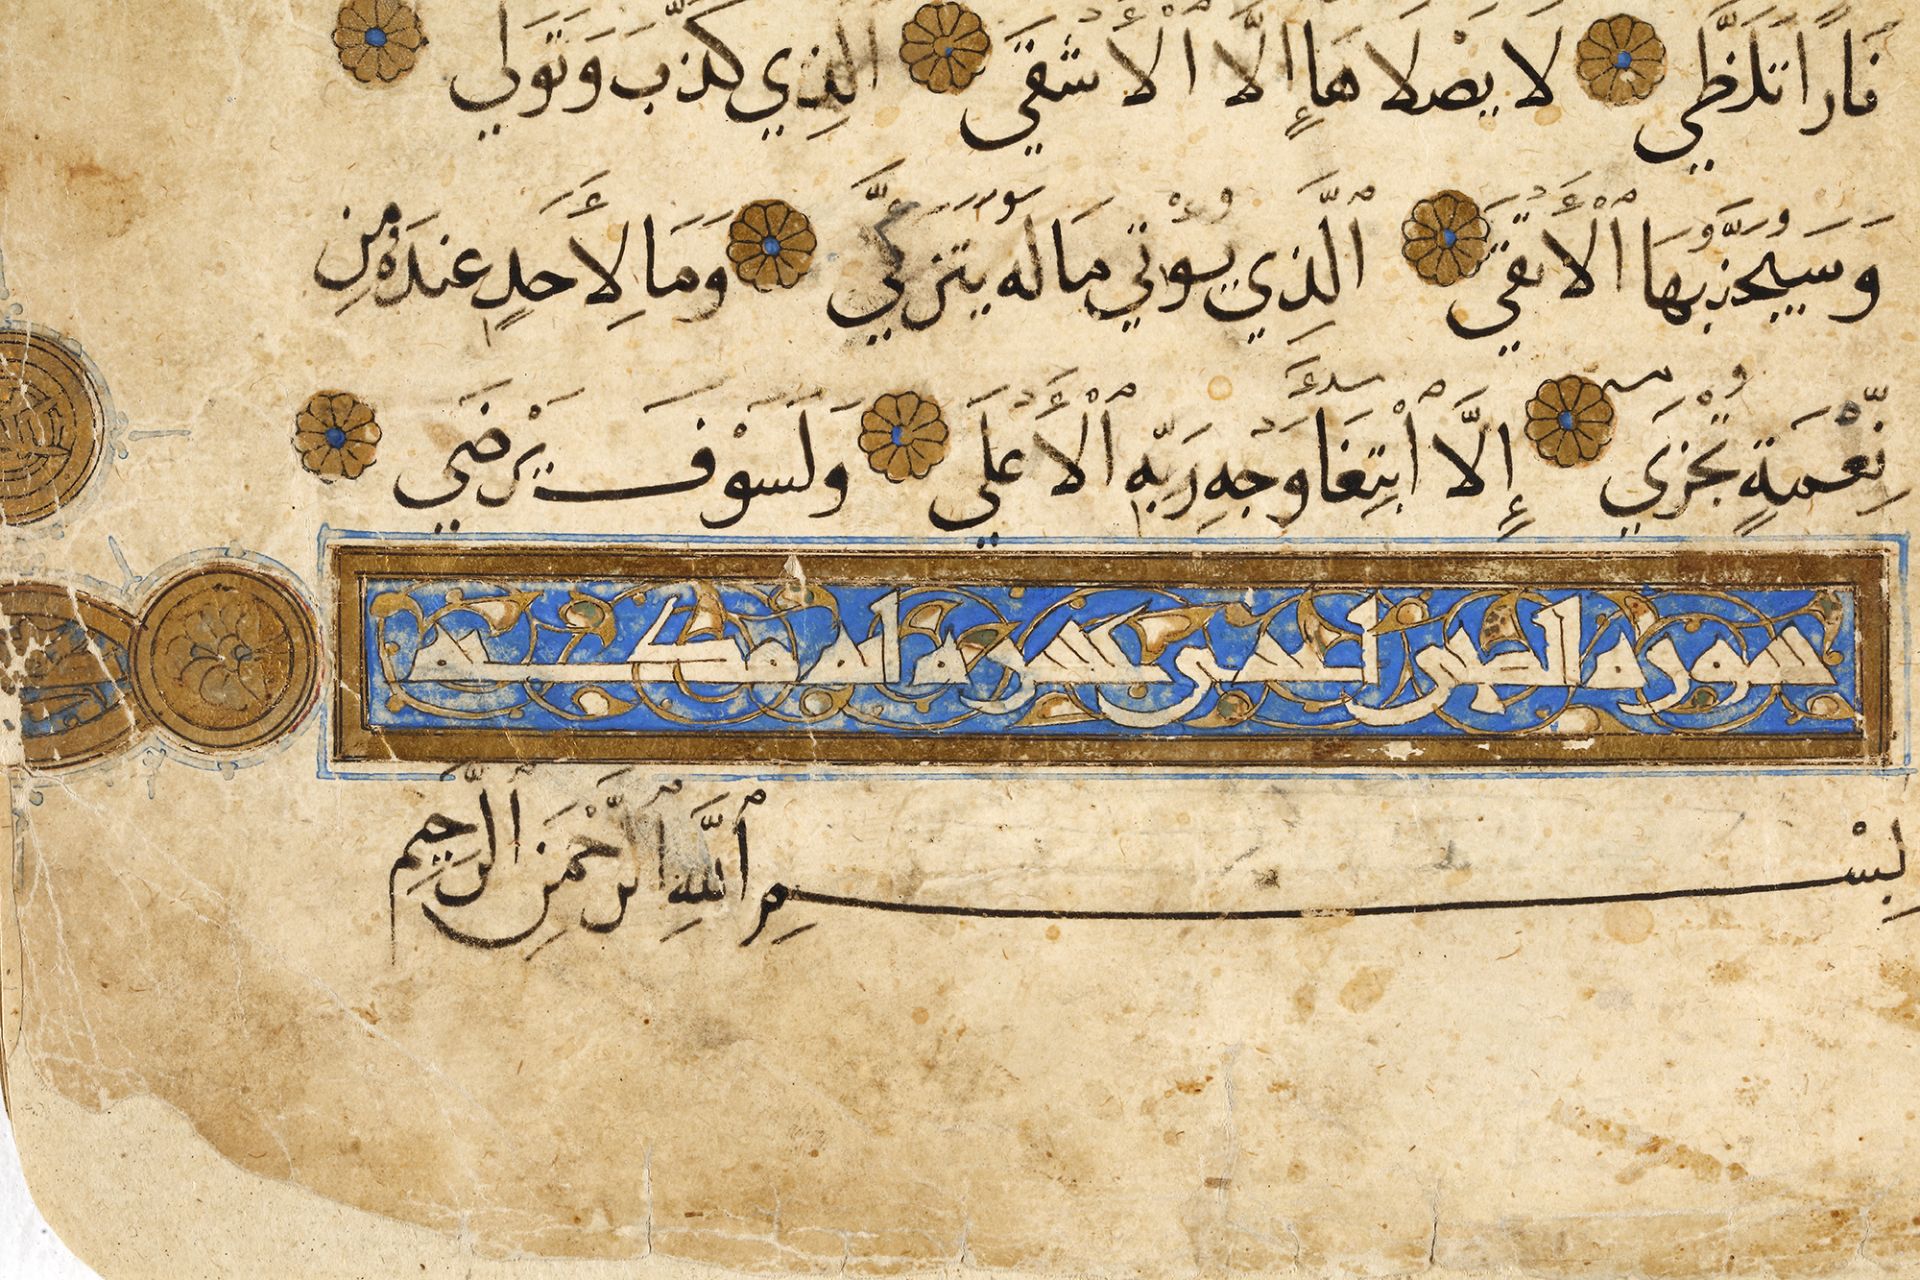 A MAMLUK QURAN (THE BAHRI DYNASTY) ATTRIBUTED TO SANDAL (ABU BAKR) SCHOOL OR STYLE, 1250-1382 AD - Image 24 of 34